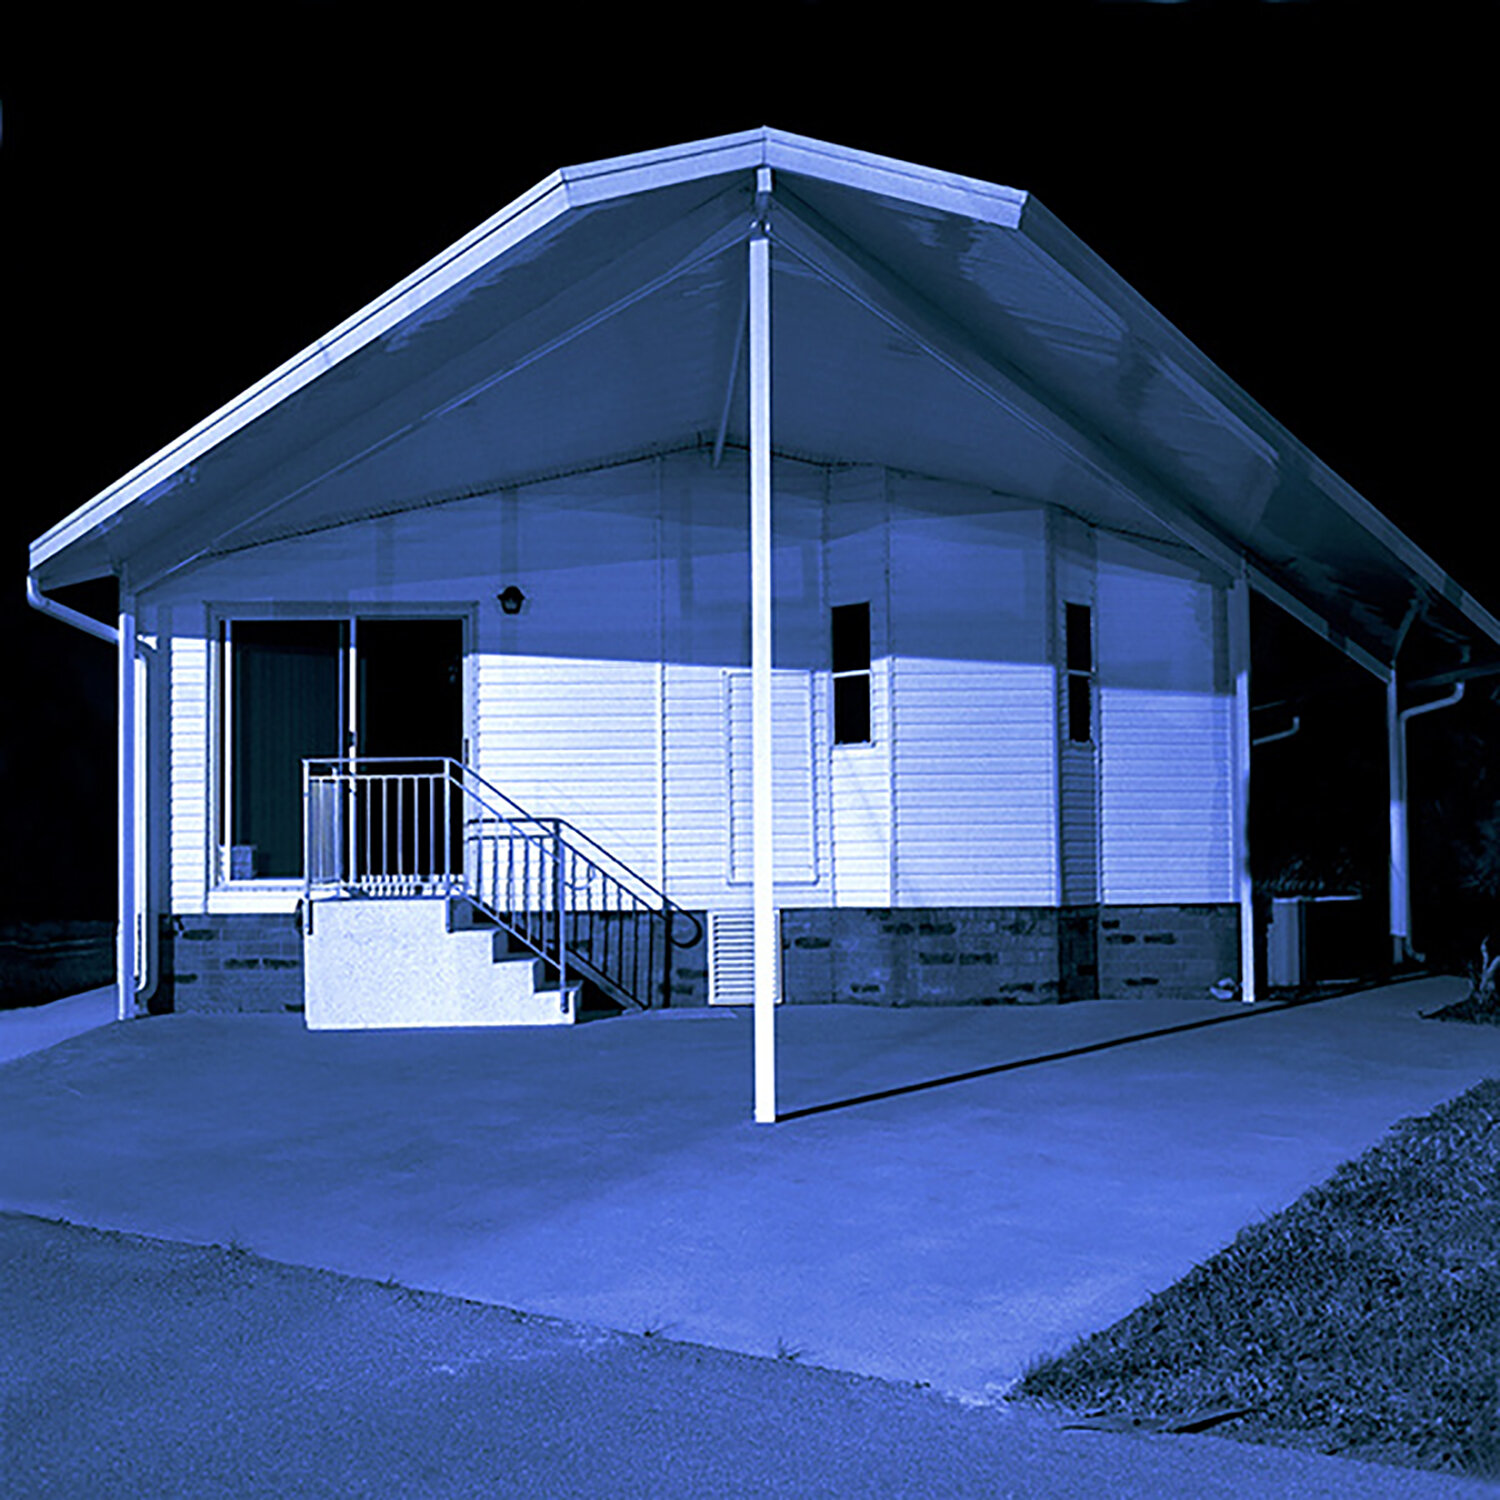 JUDY GELLES | Mobile Home #2, 15 x 15 inches / 38 x 38 cm, Fuji crystal archive print, edition of 10, 2001-2006